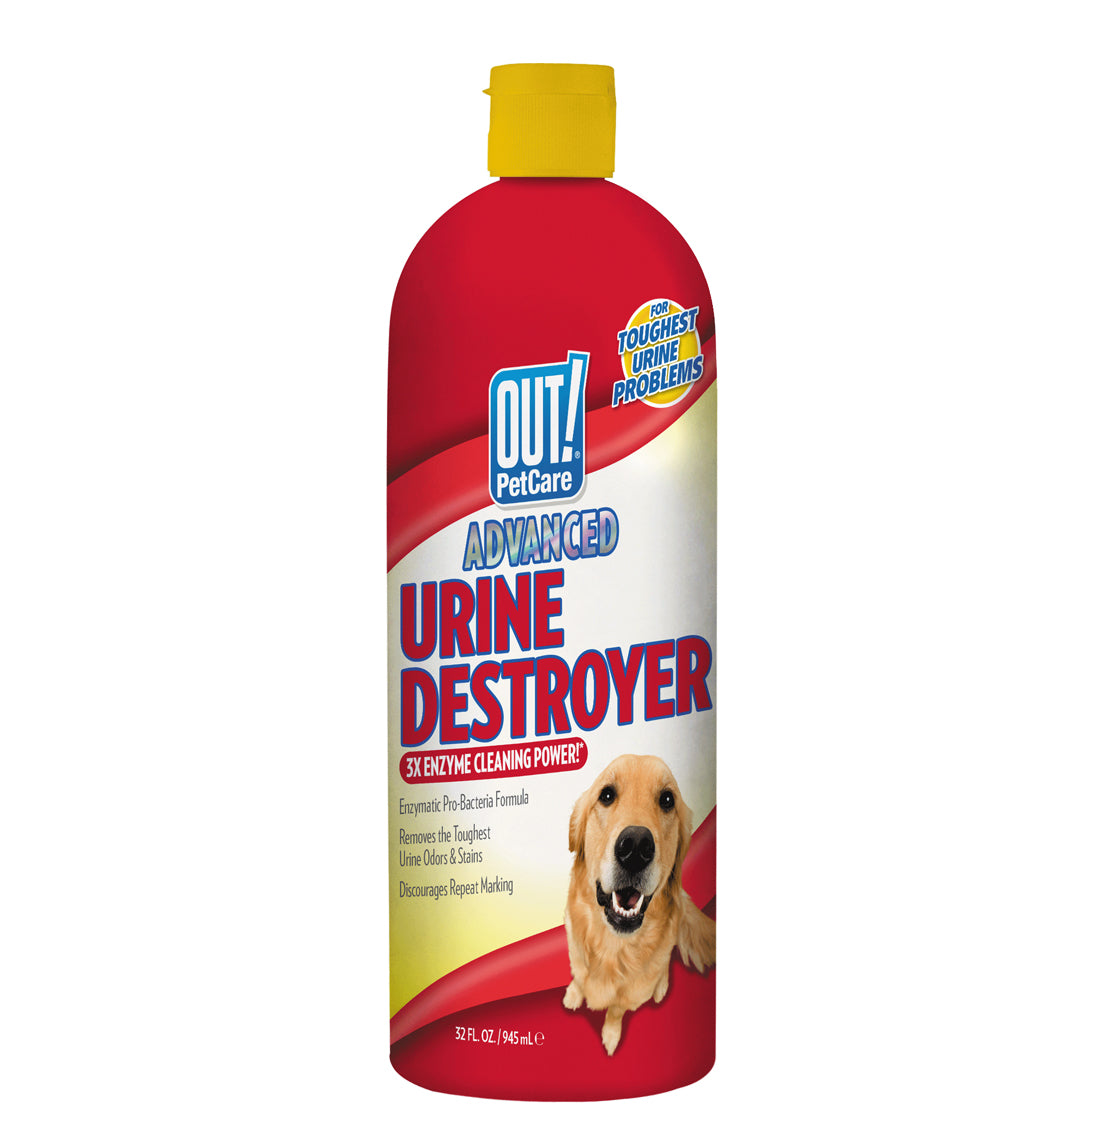 Out Petcare Advanced Urine Destroyer